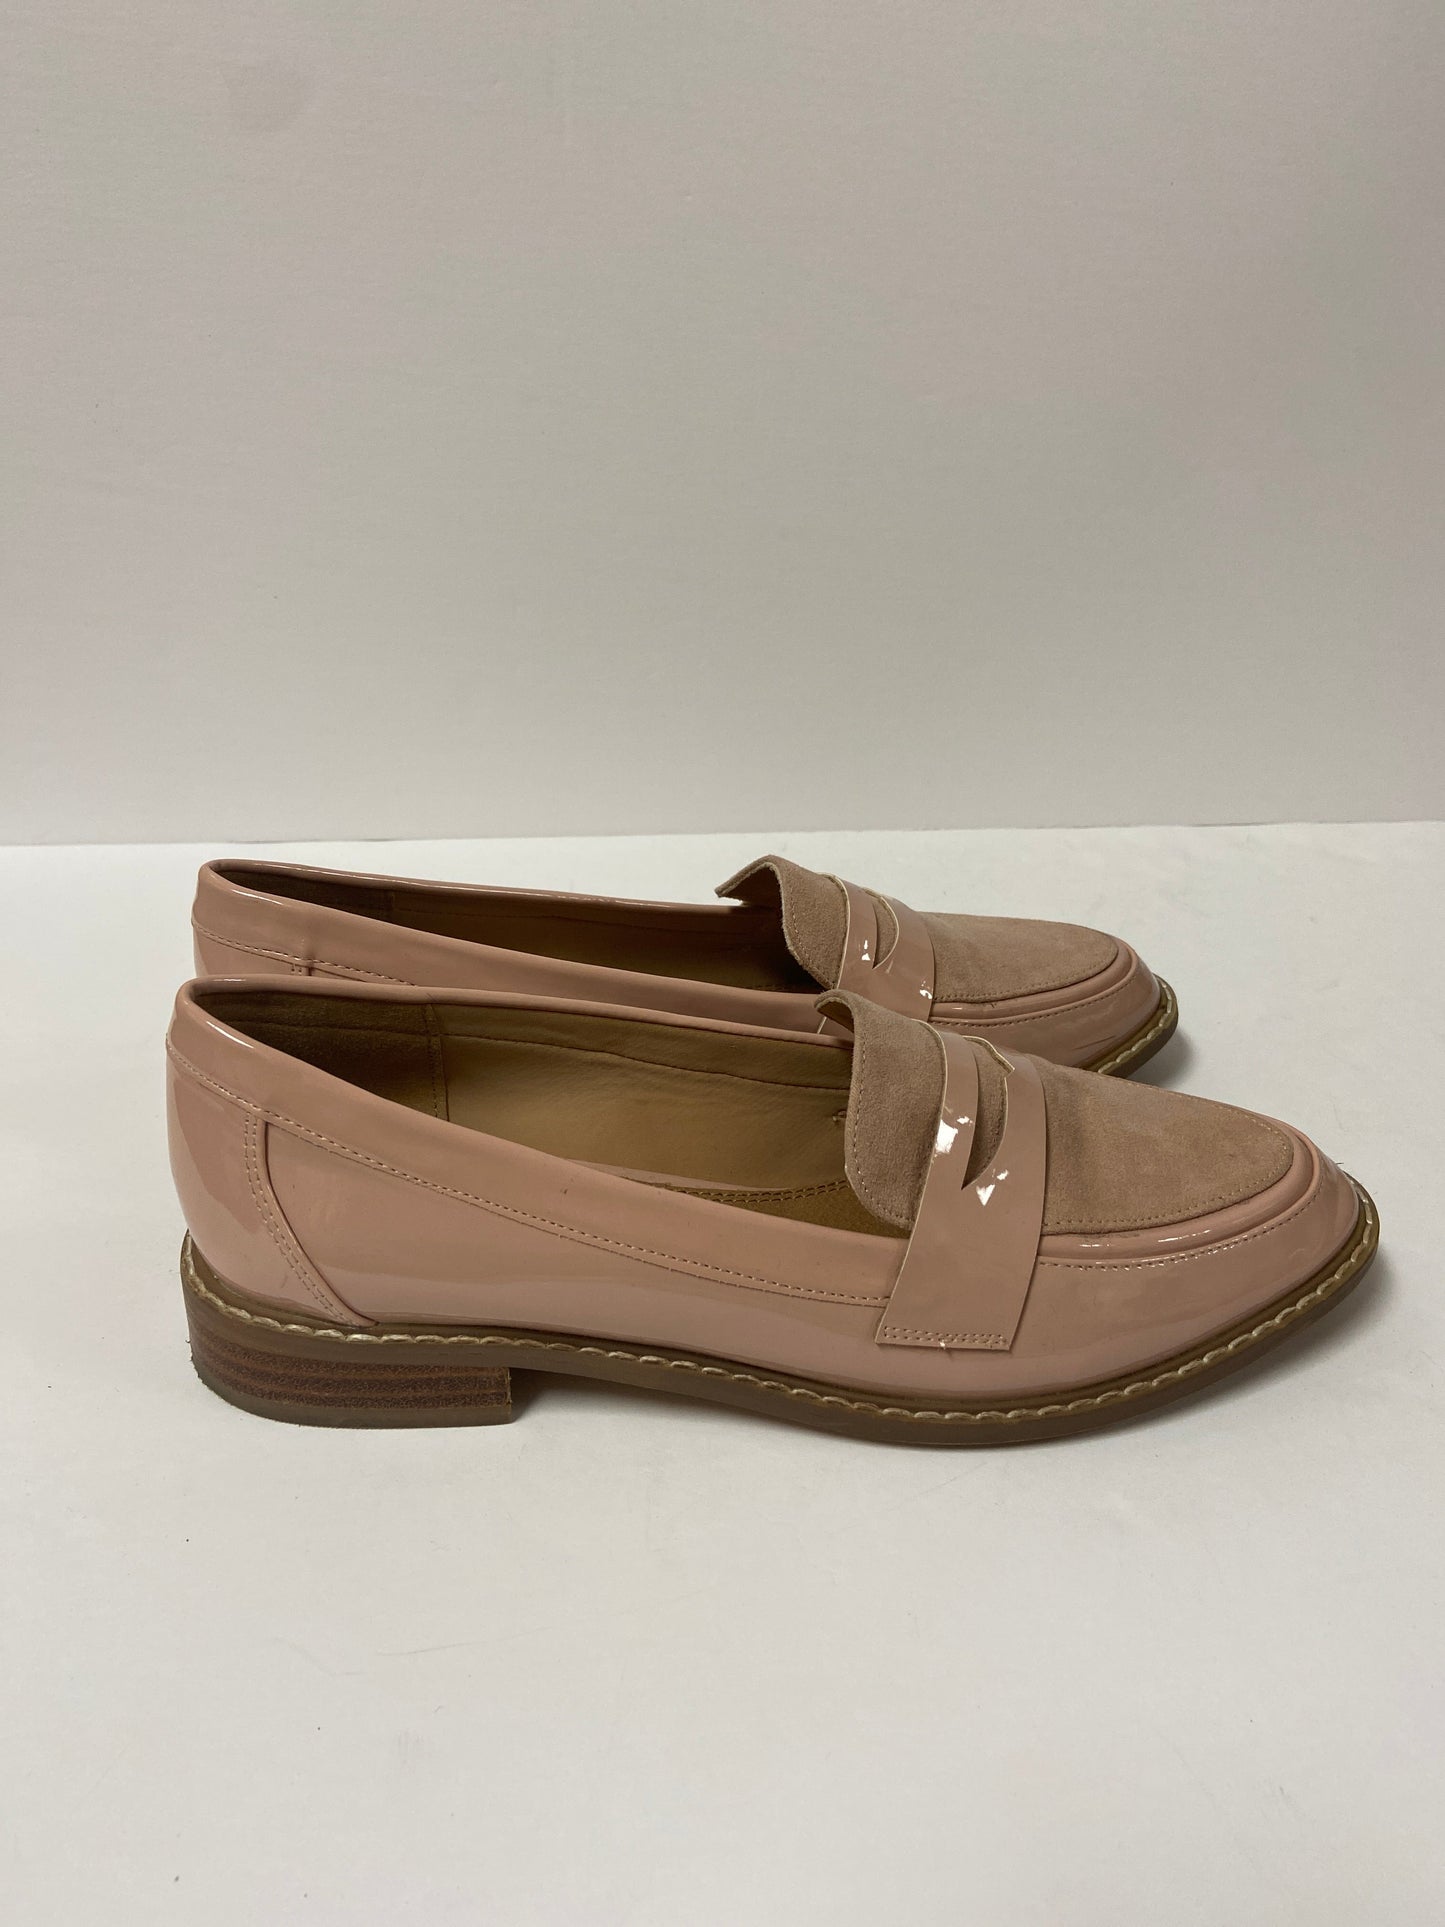 Shoes Flats Loafer Oxford By Asos  Size: 6